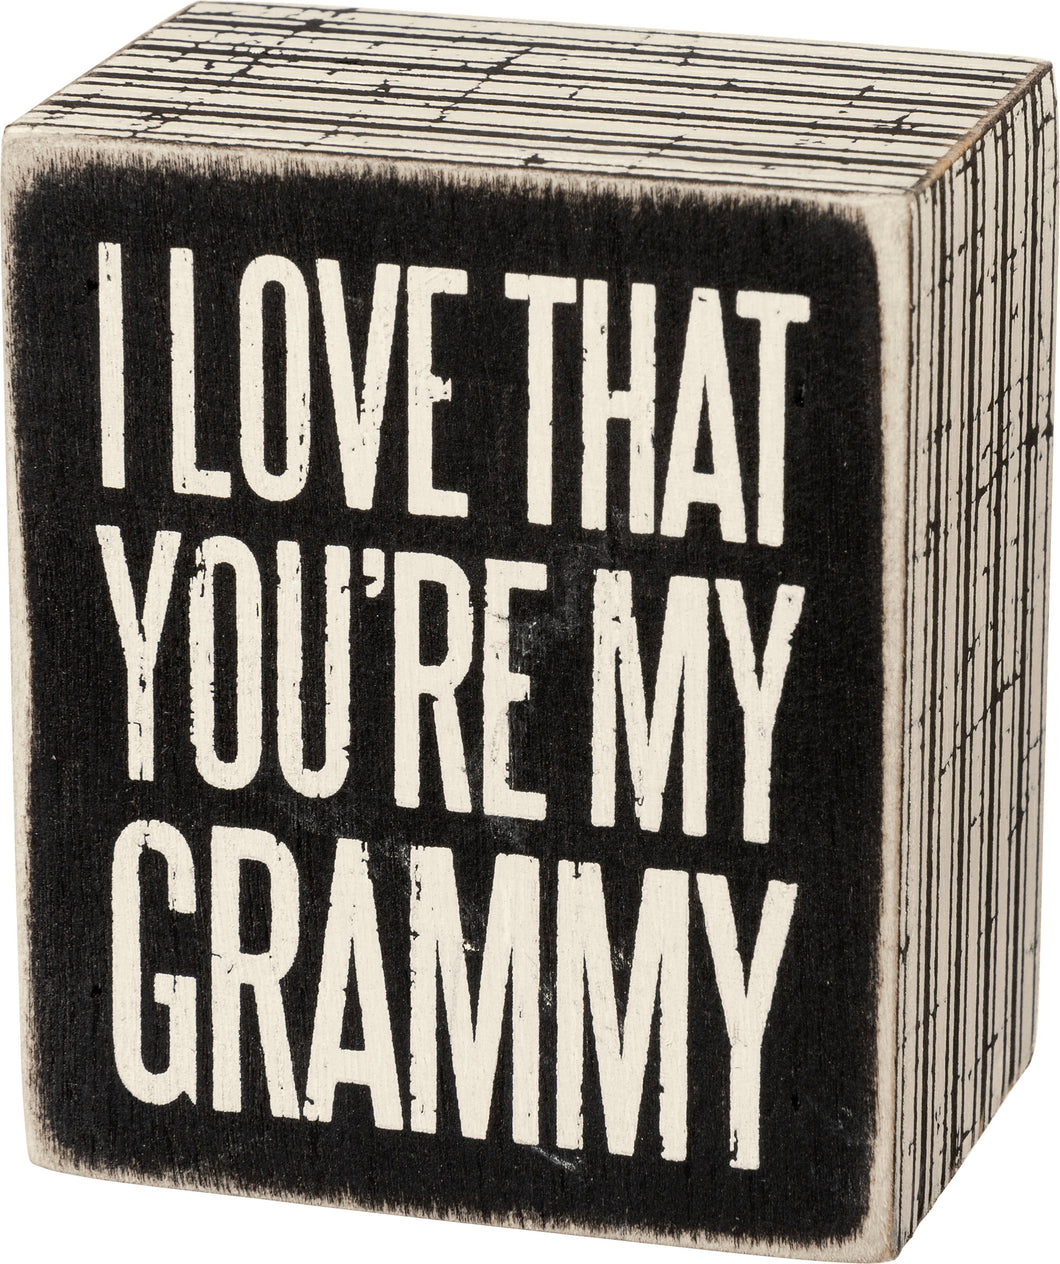 I Love That You're My Grammy Box Sign